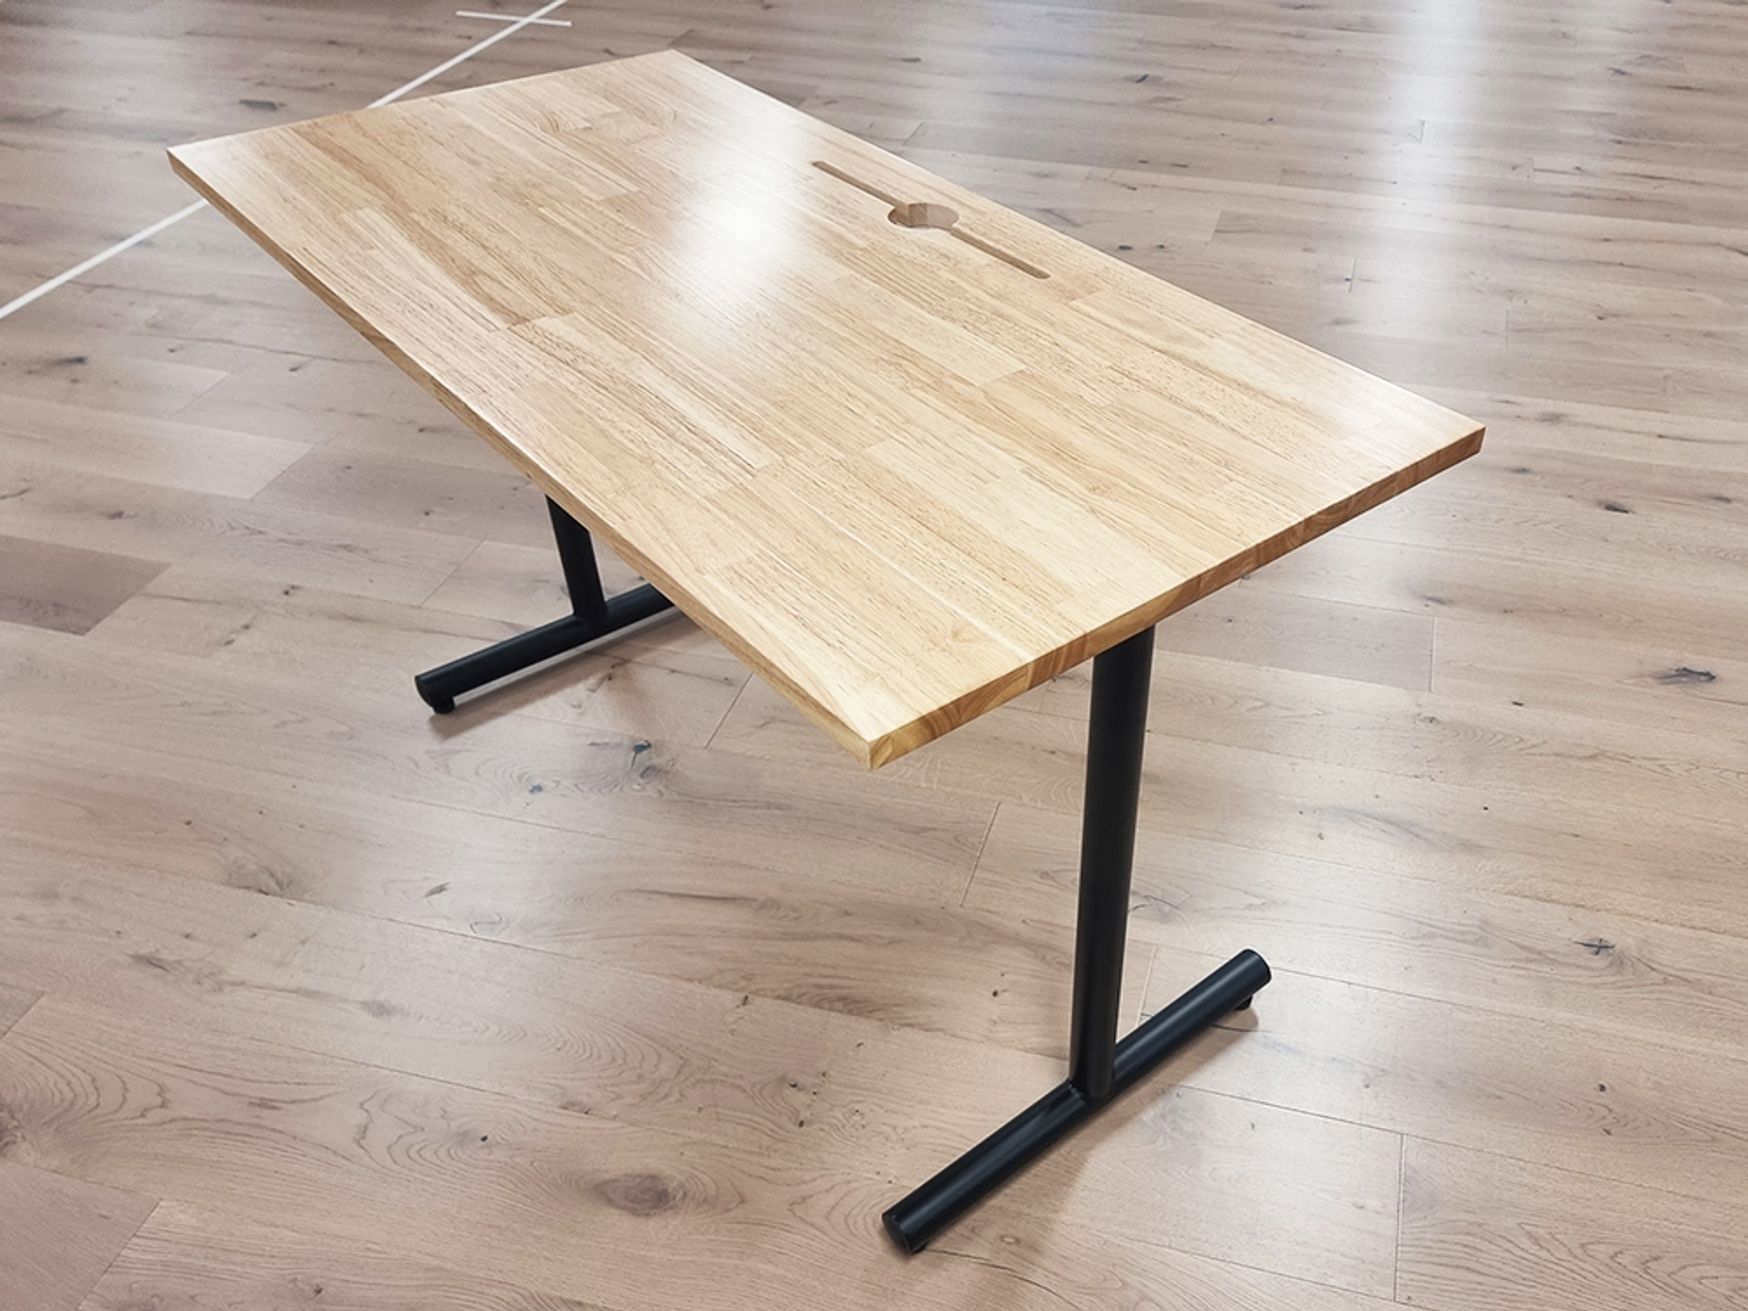 Over 200 used 1220mm Wooden Desks with 'T' Legs